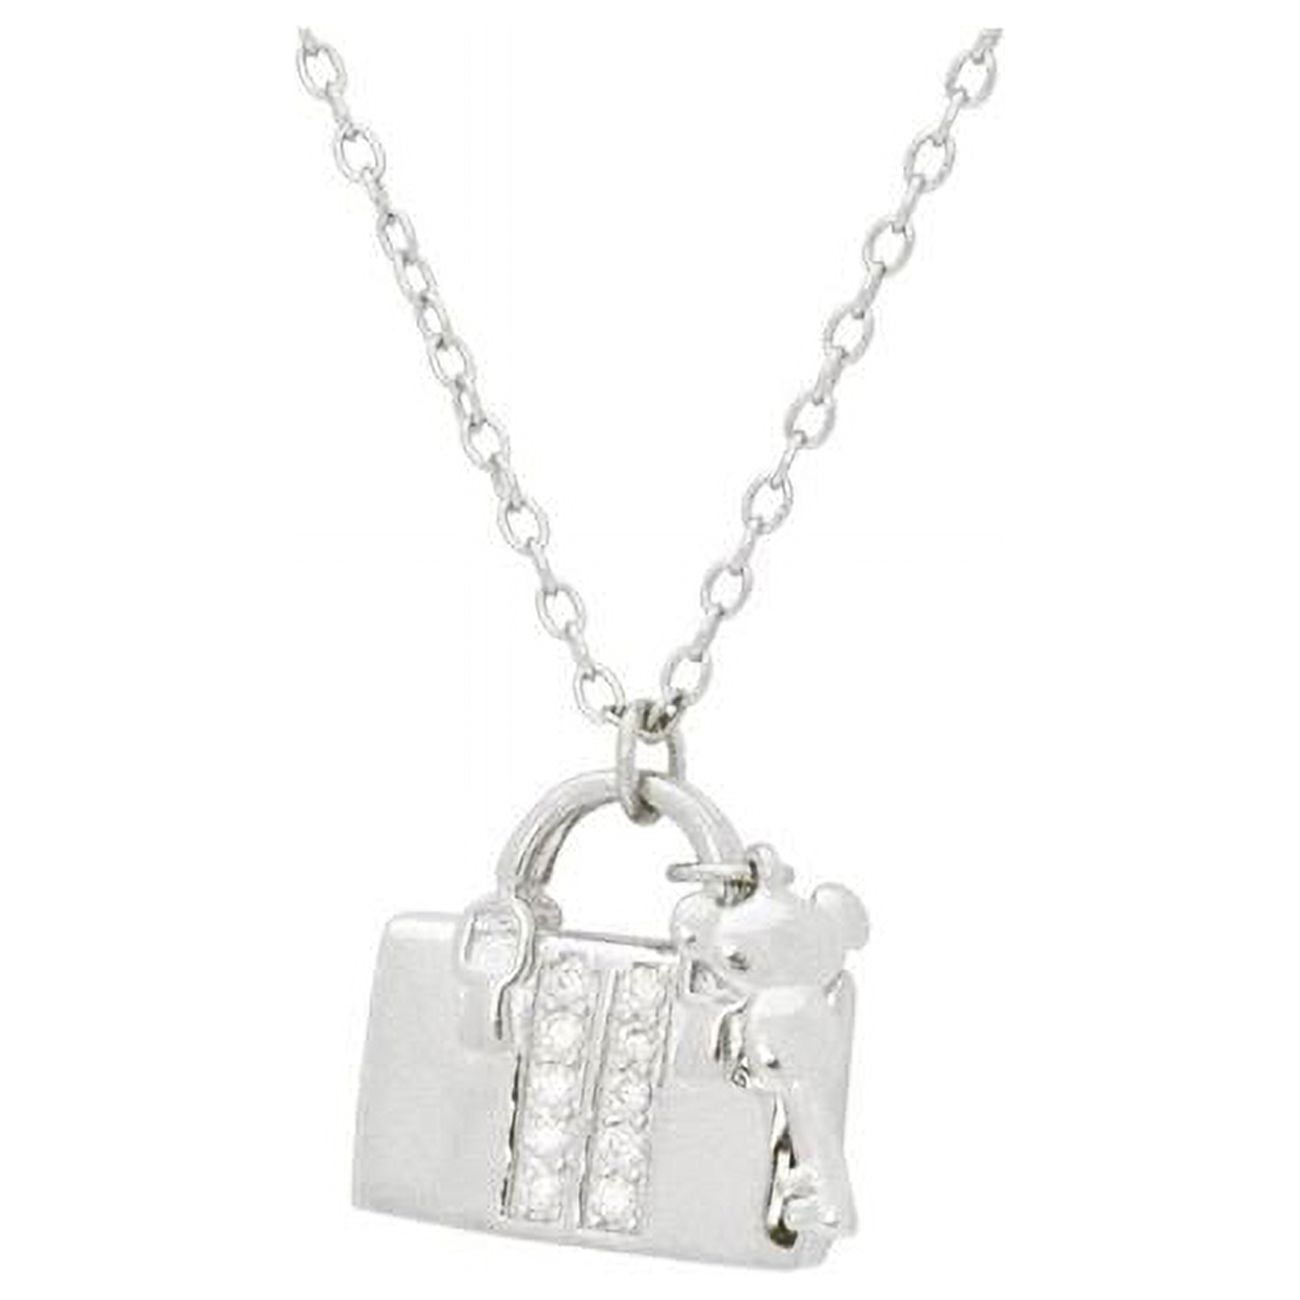 111203 16 & 2 In. Teen Sparkling Cz Purse & Key Pendant Necklace In Sterling Silver